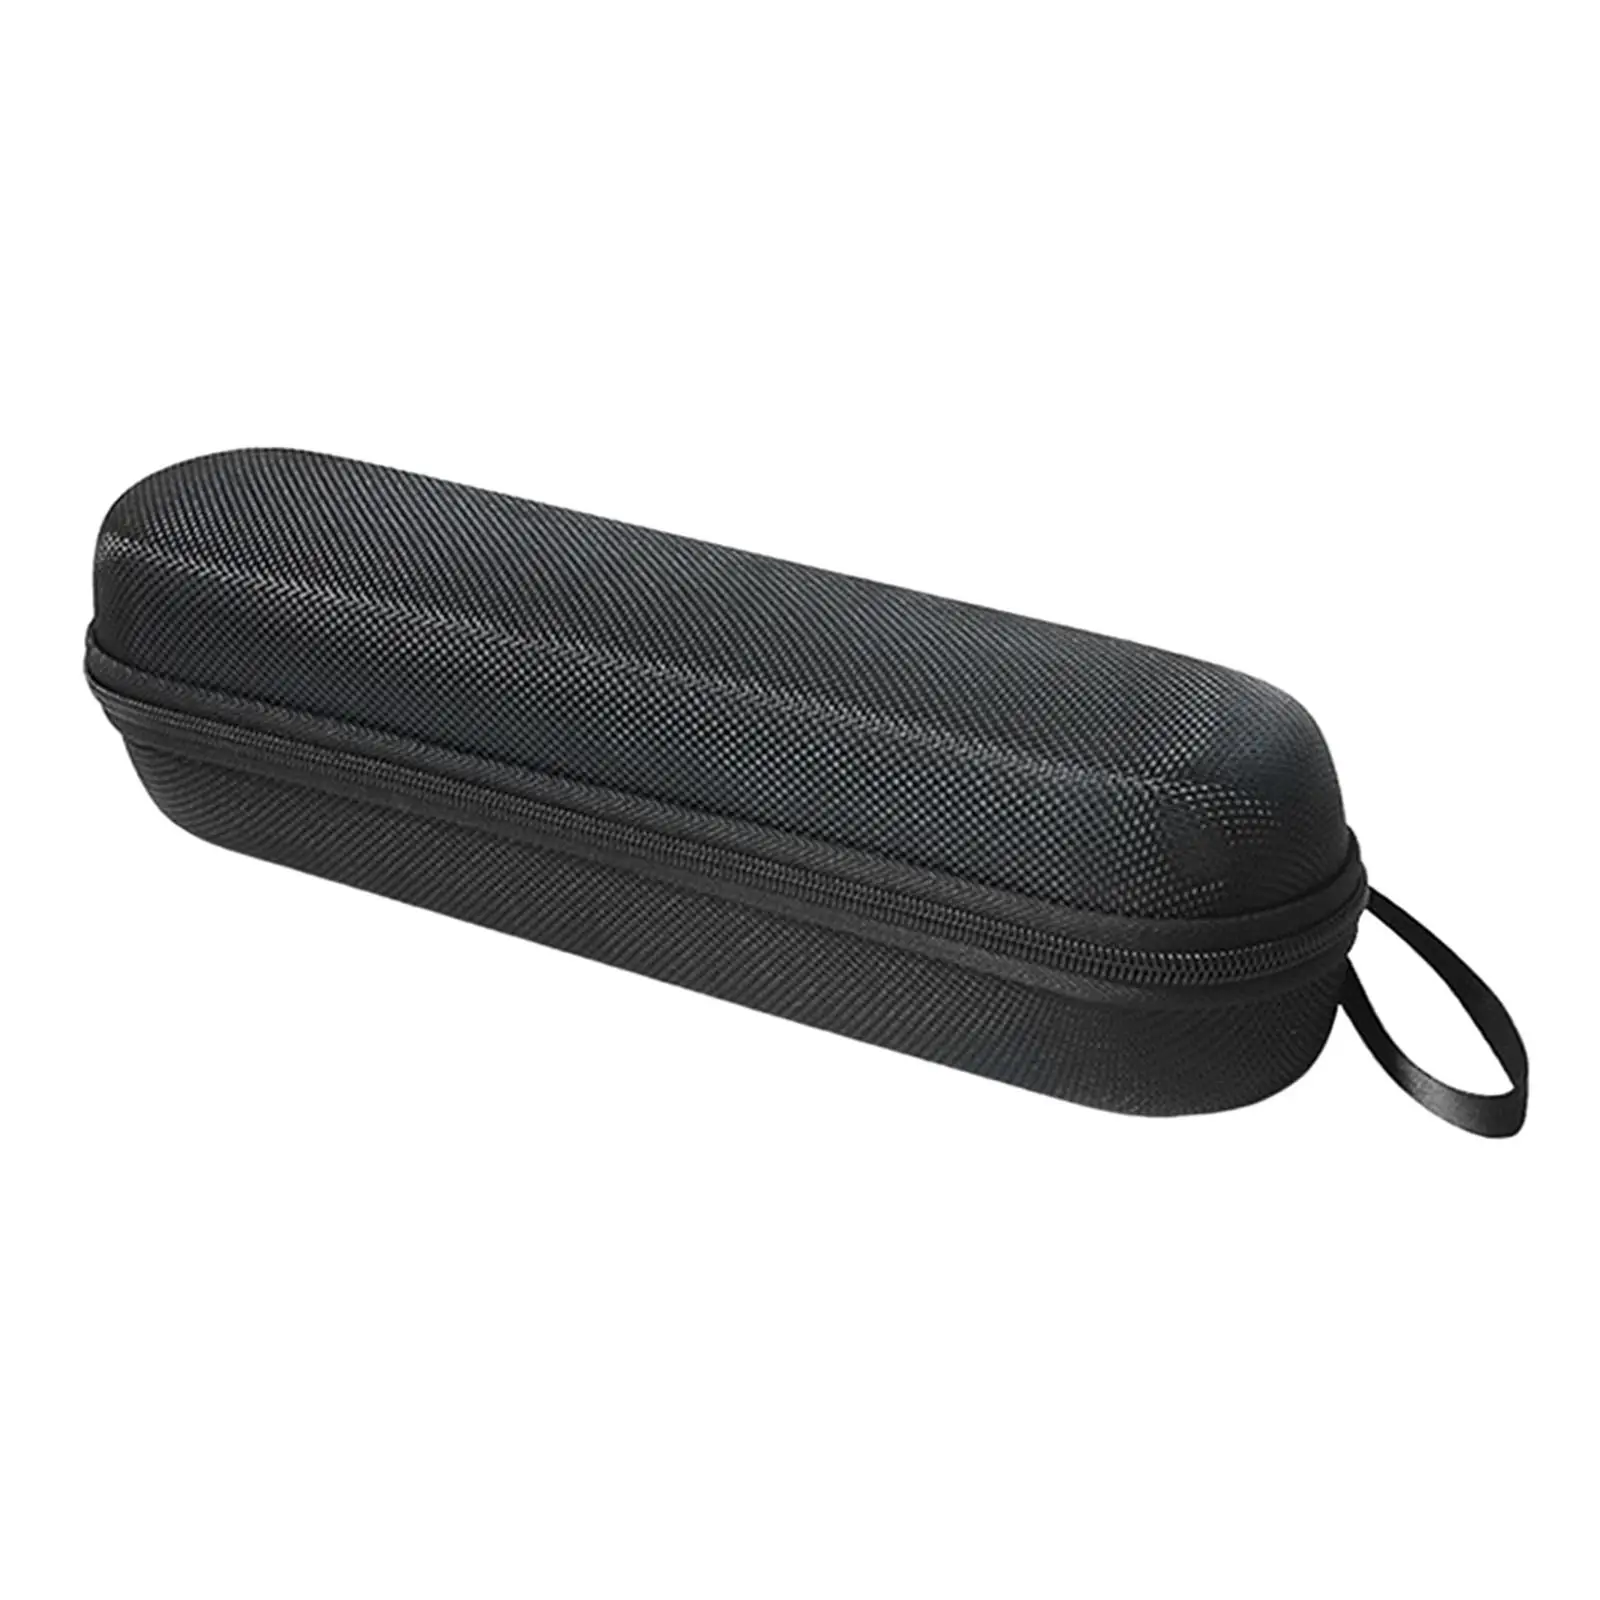 Toothbrush Travel Case with Mesh Pocket for Accessories Dustproof 278x70x70mm Easy to Carry Shockproof Convenient Toothbrush Box